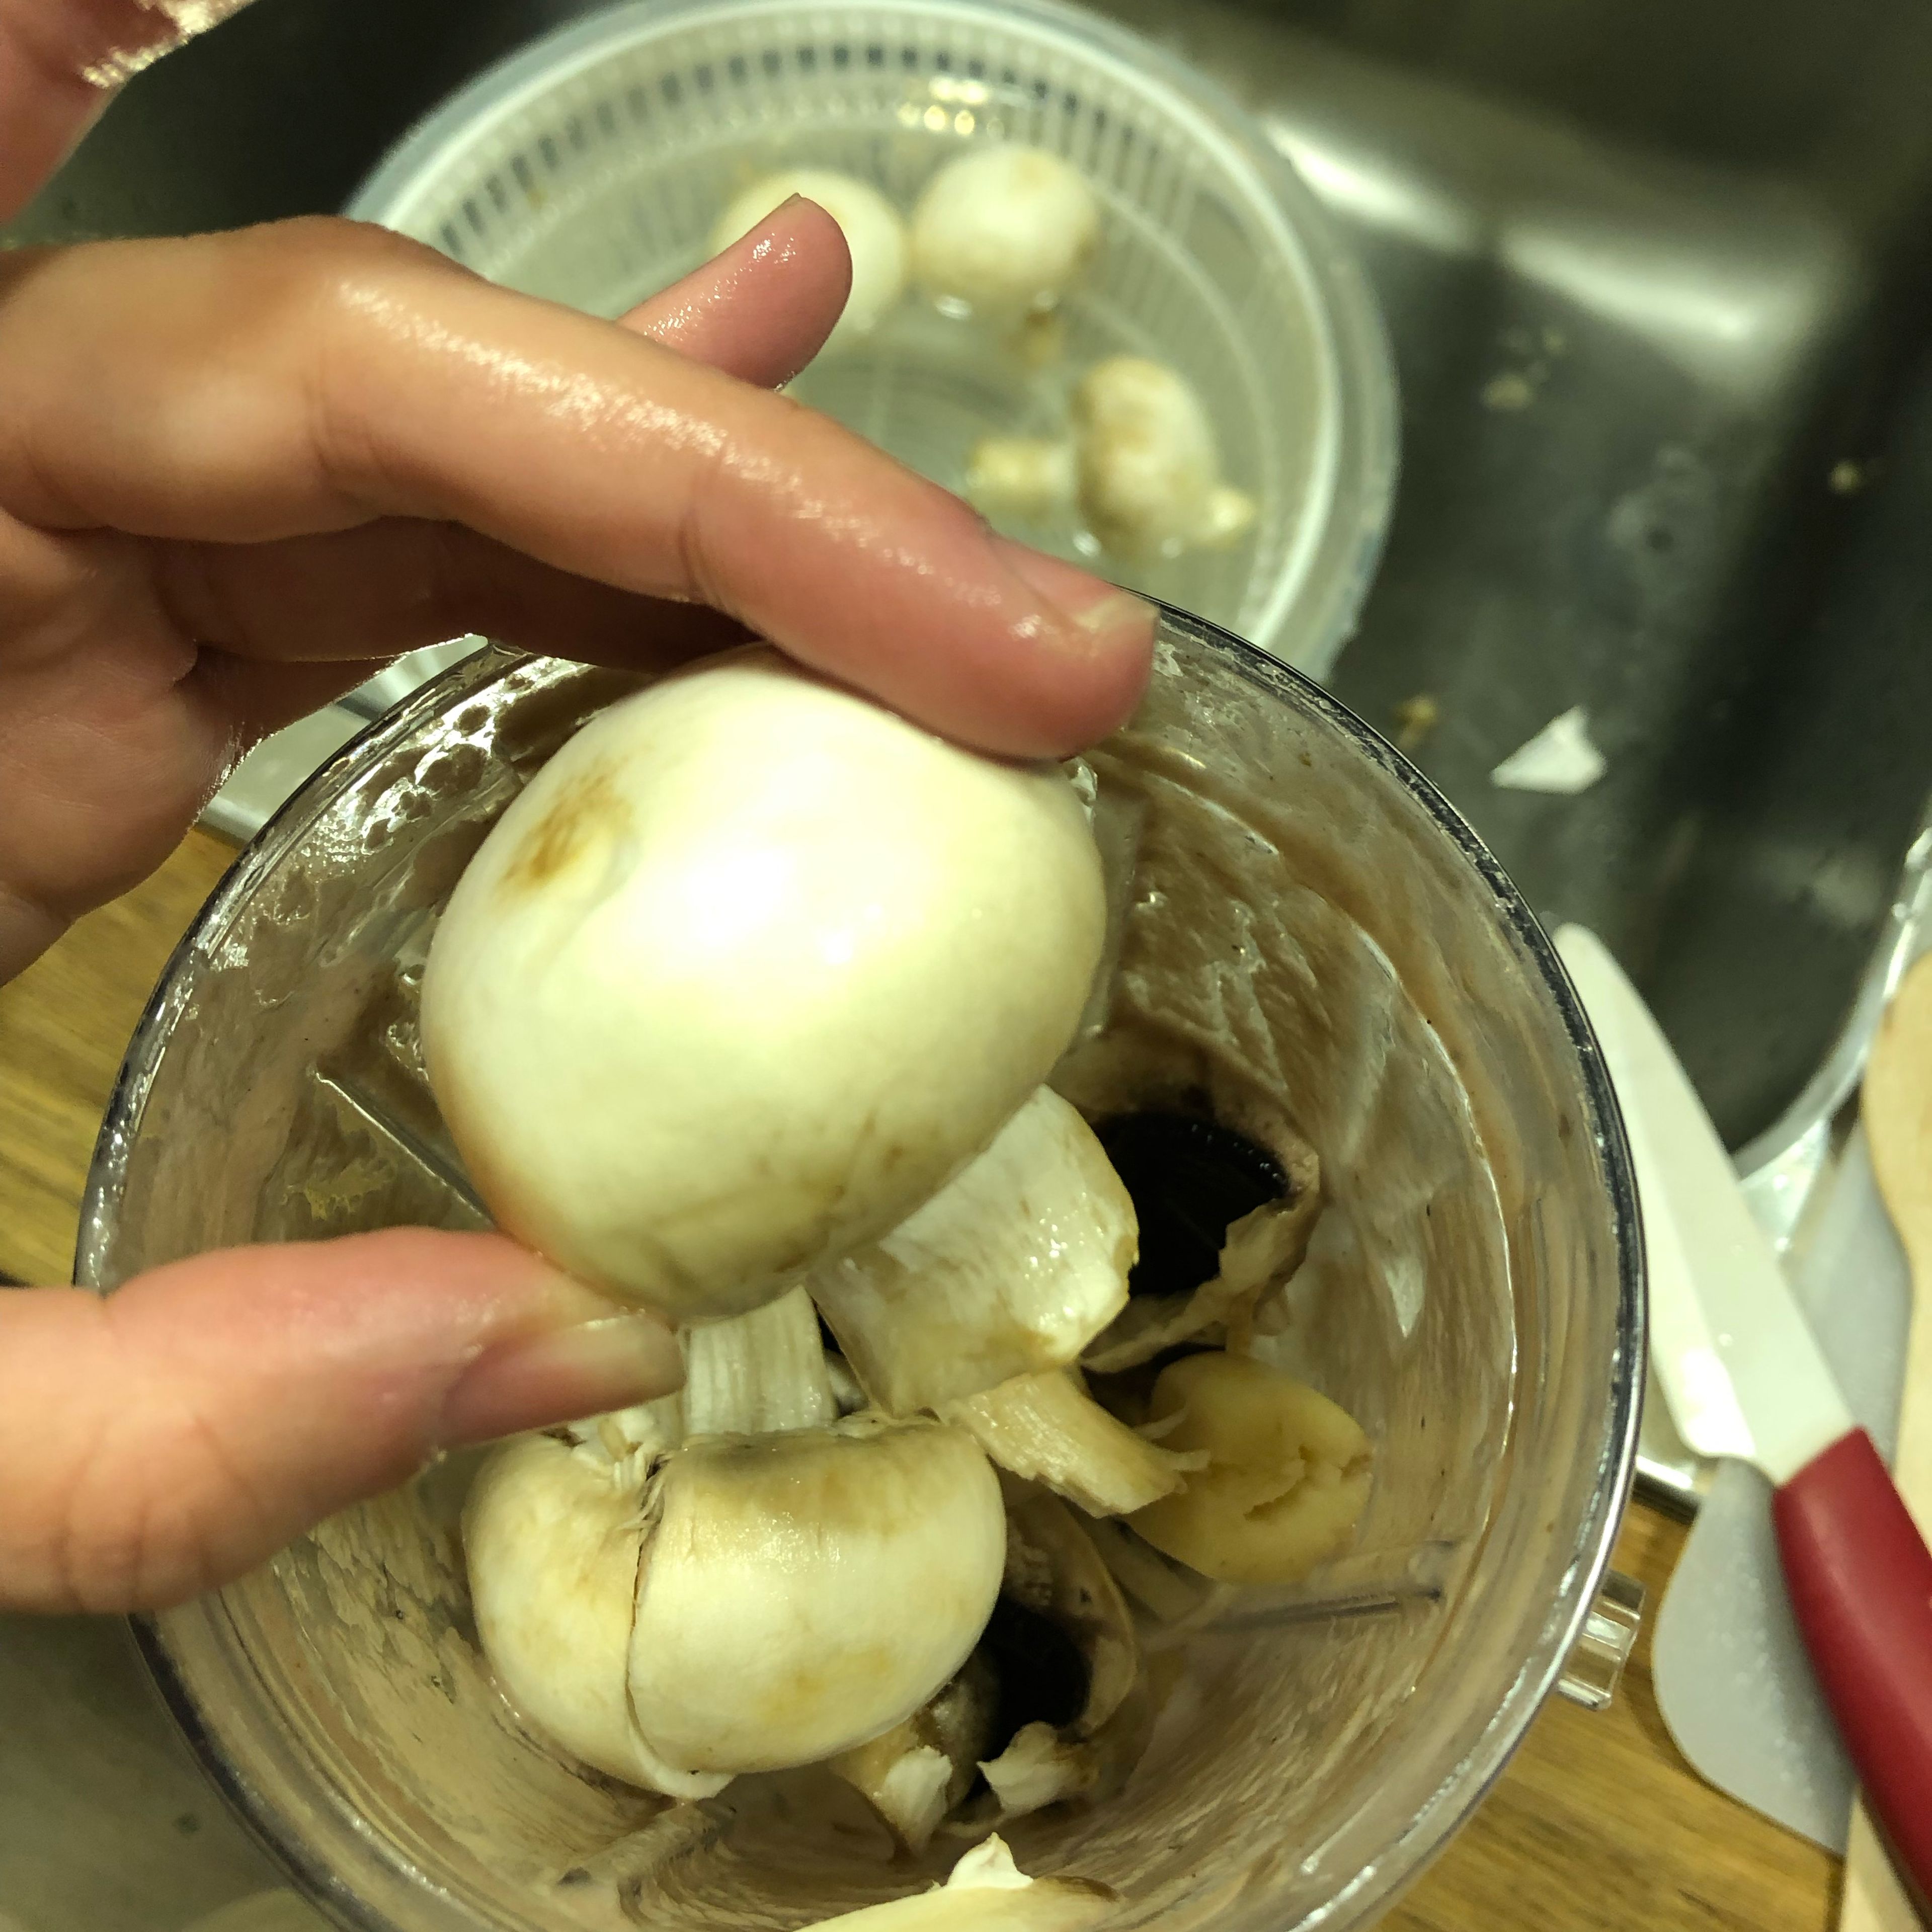 Add the clean and fresh champignon paris into the Blender